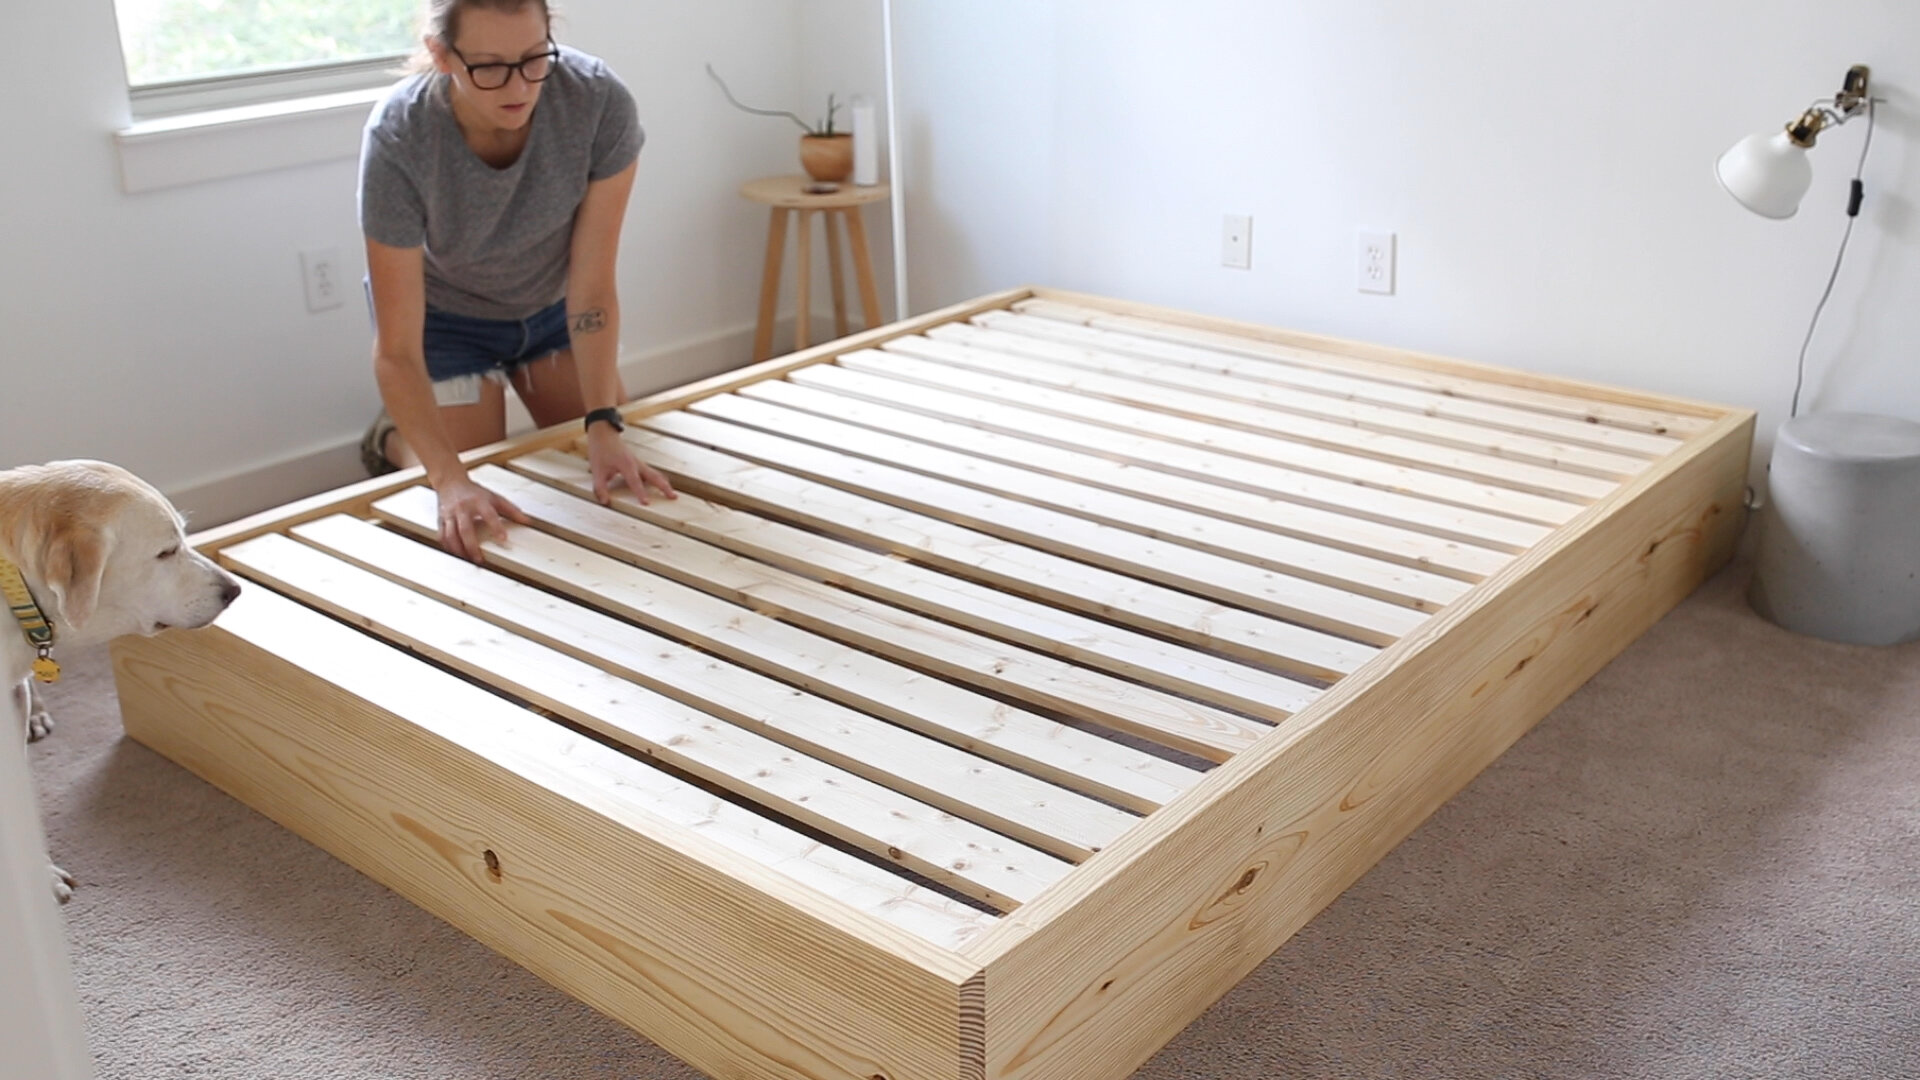 How To Build An Easy Bed Platform, How To Diy Platform Bed